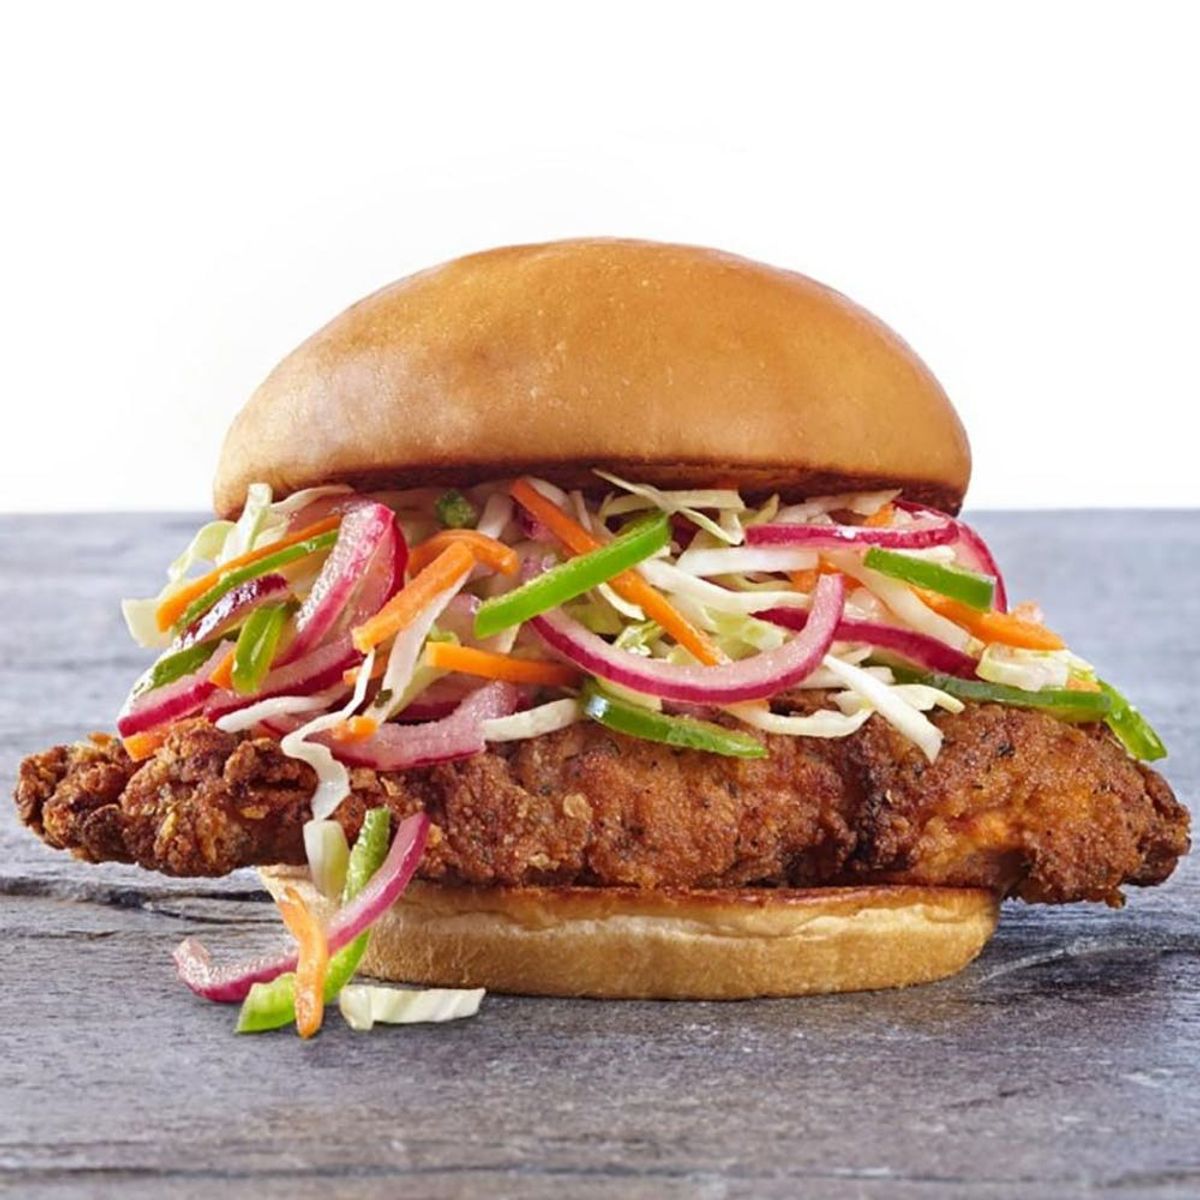 This New All-Organic Fast Food Restaurant Could Replace KFC